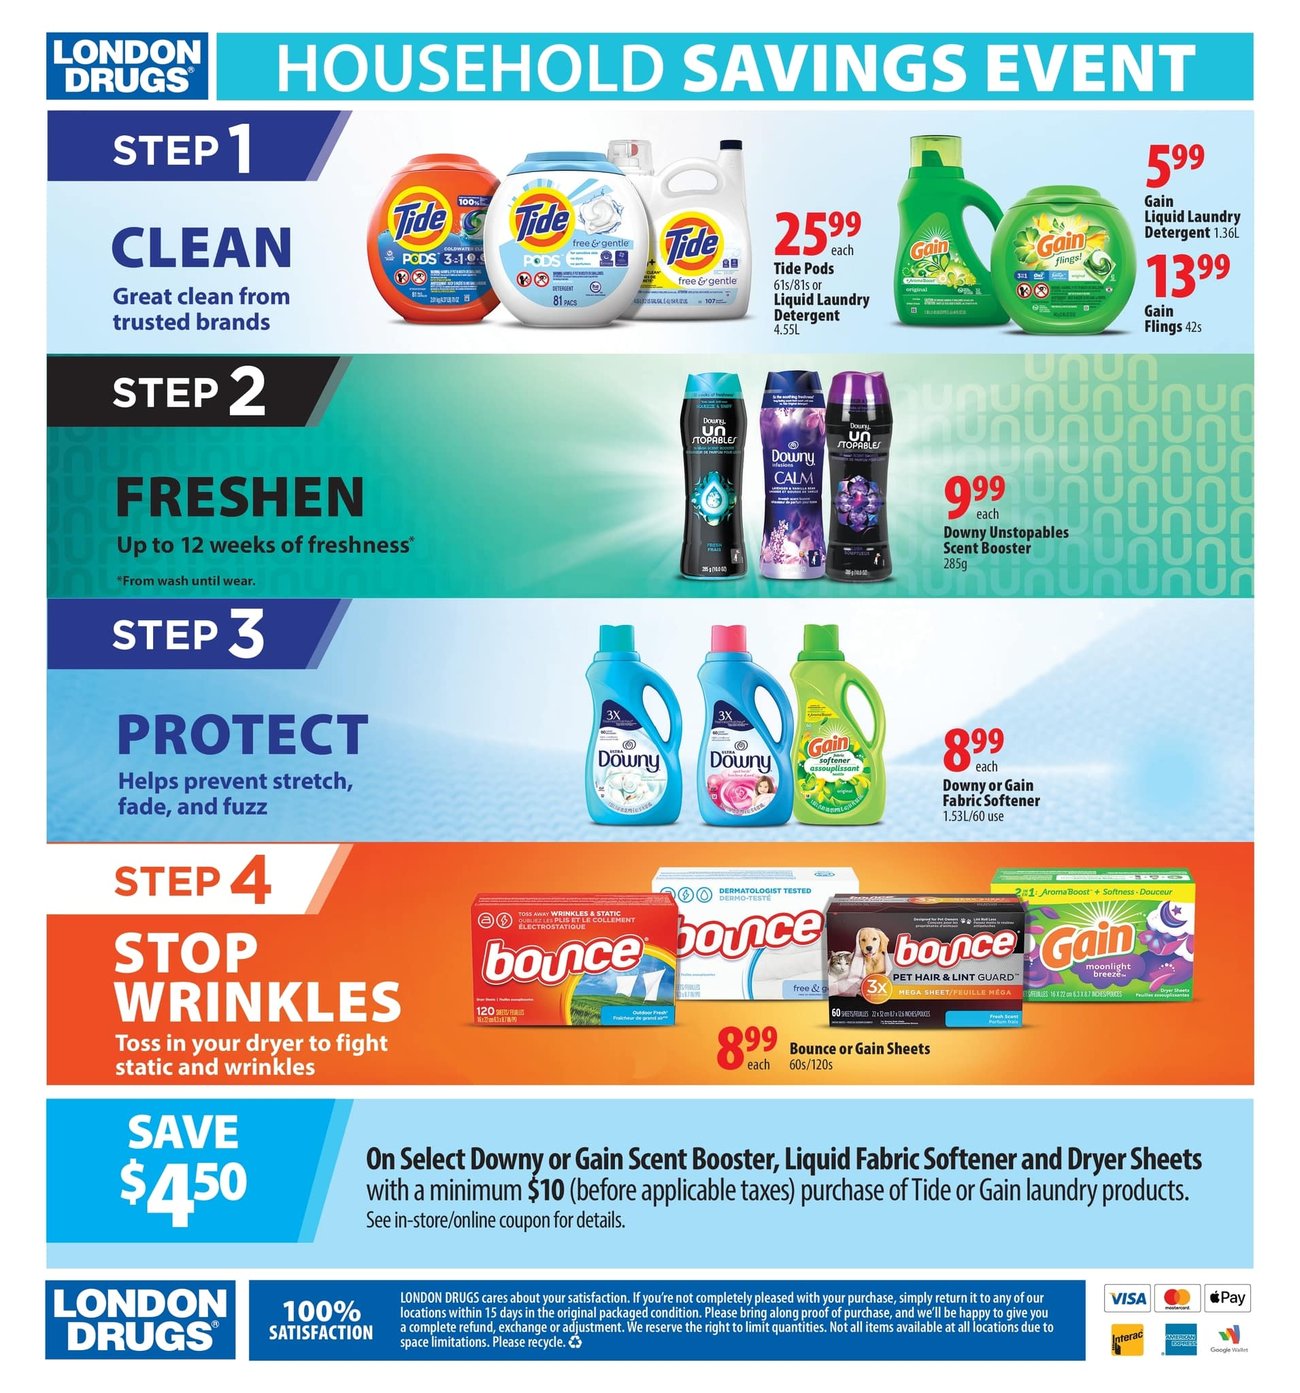 London Drugs - Household Savings Event - Page 4